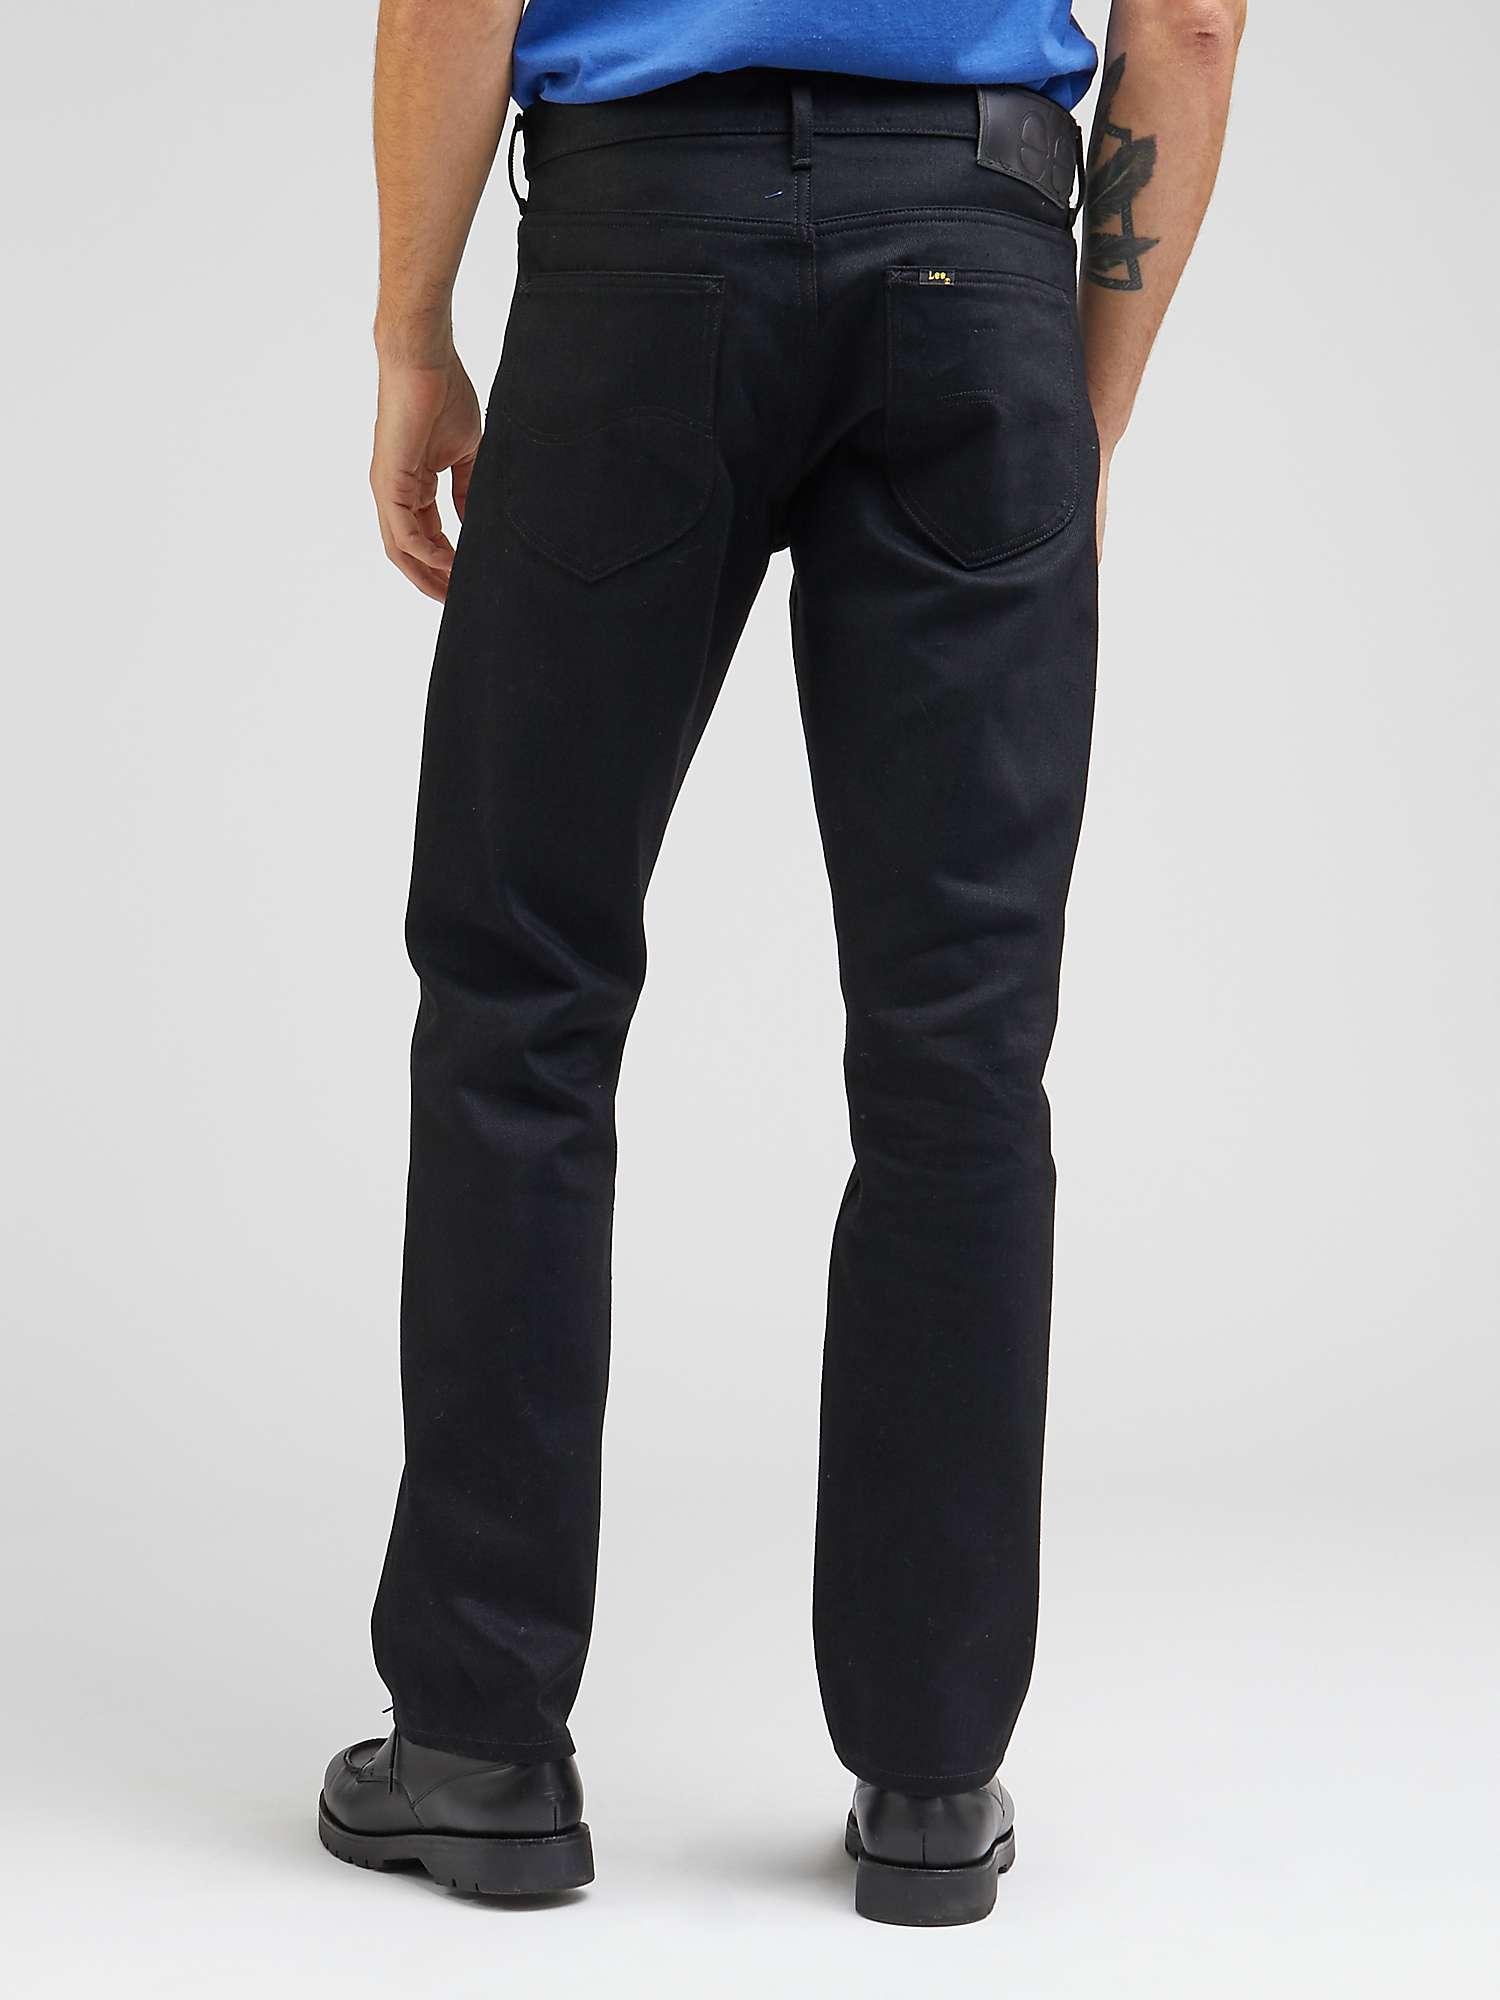 Buy Lee Authentic 101 Zip Fly Relaxed Fit Jeans Online at johnlewis.com